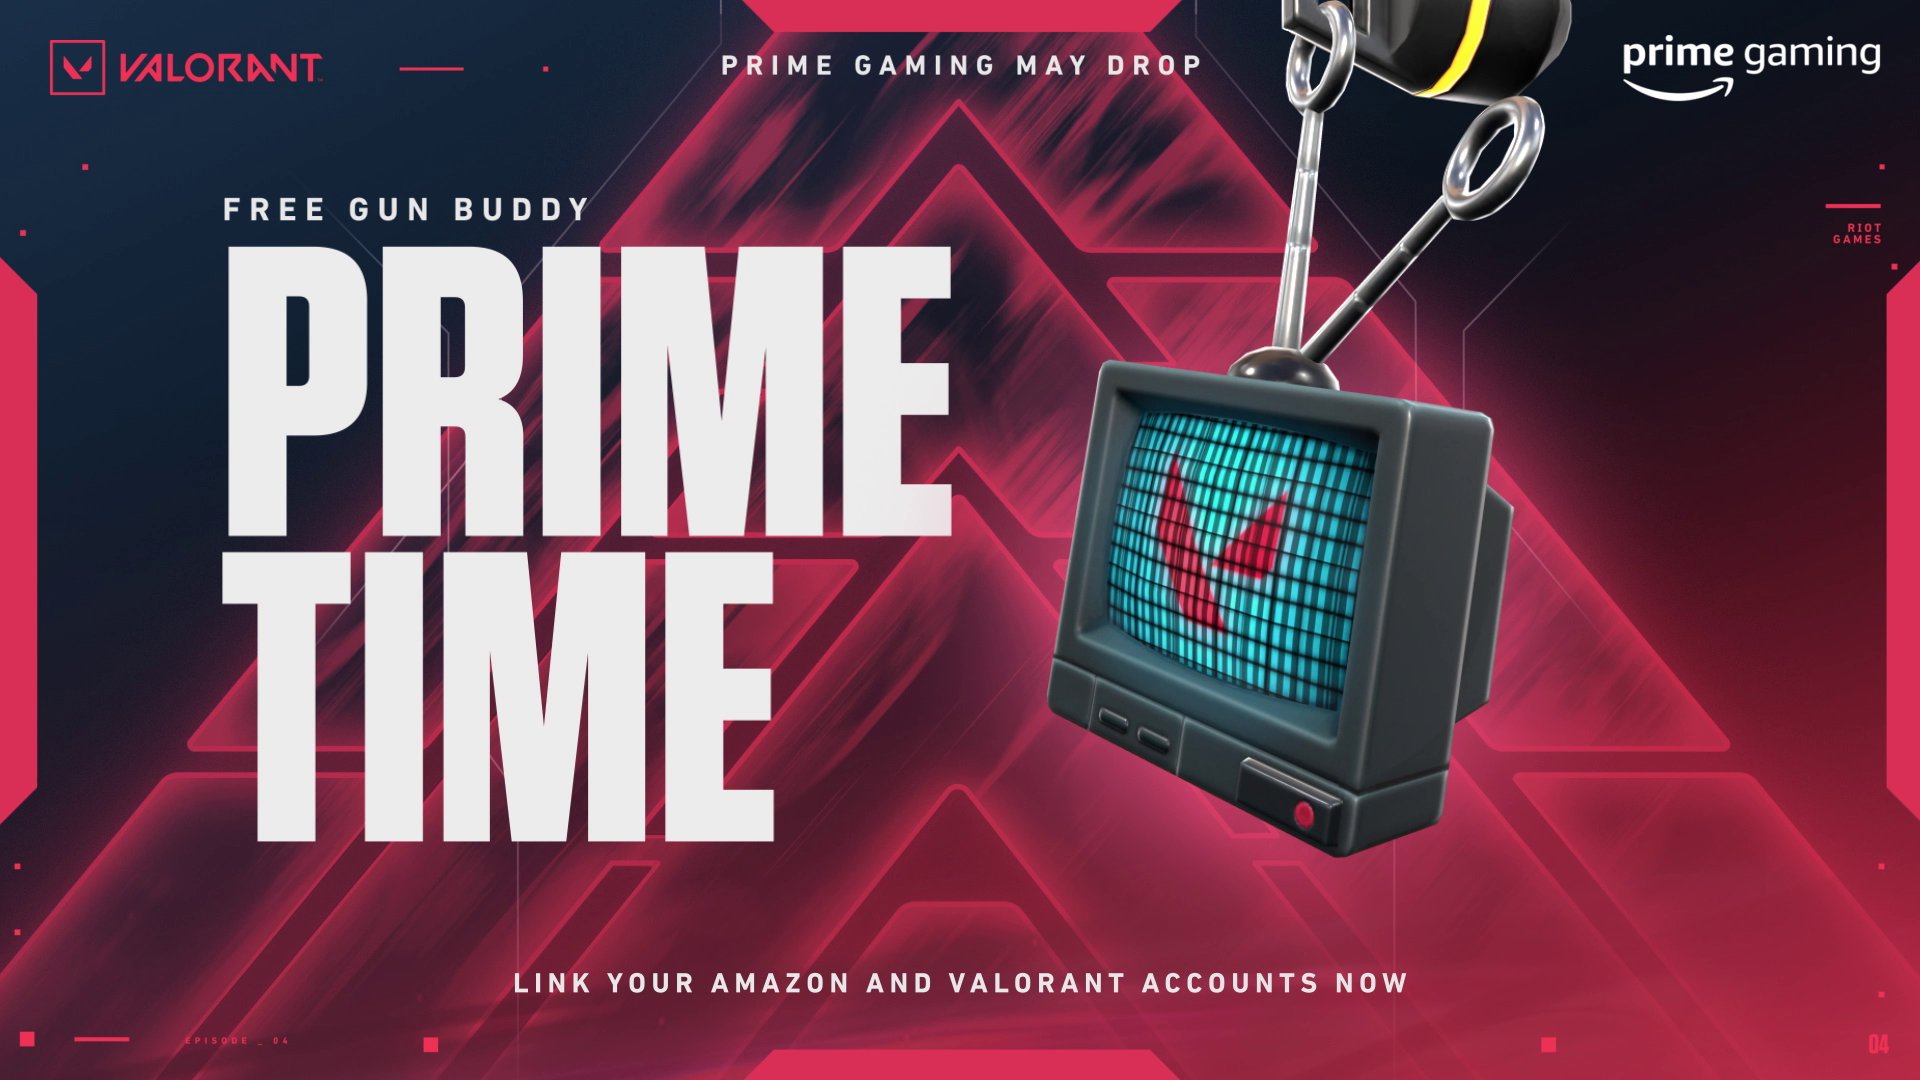 Valorant - Tower of Power Gun Buddy FREE with Prime Gaming!